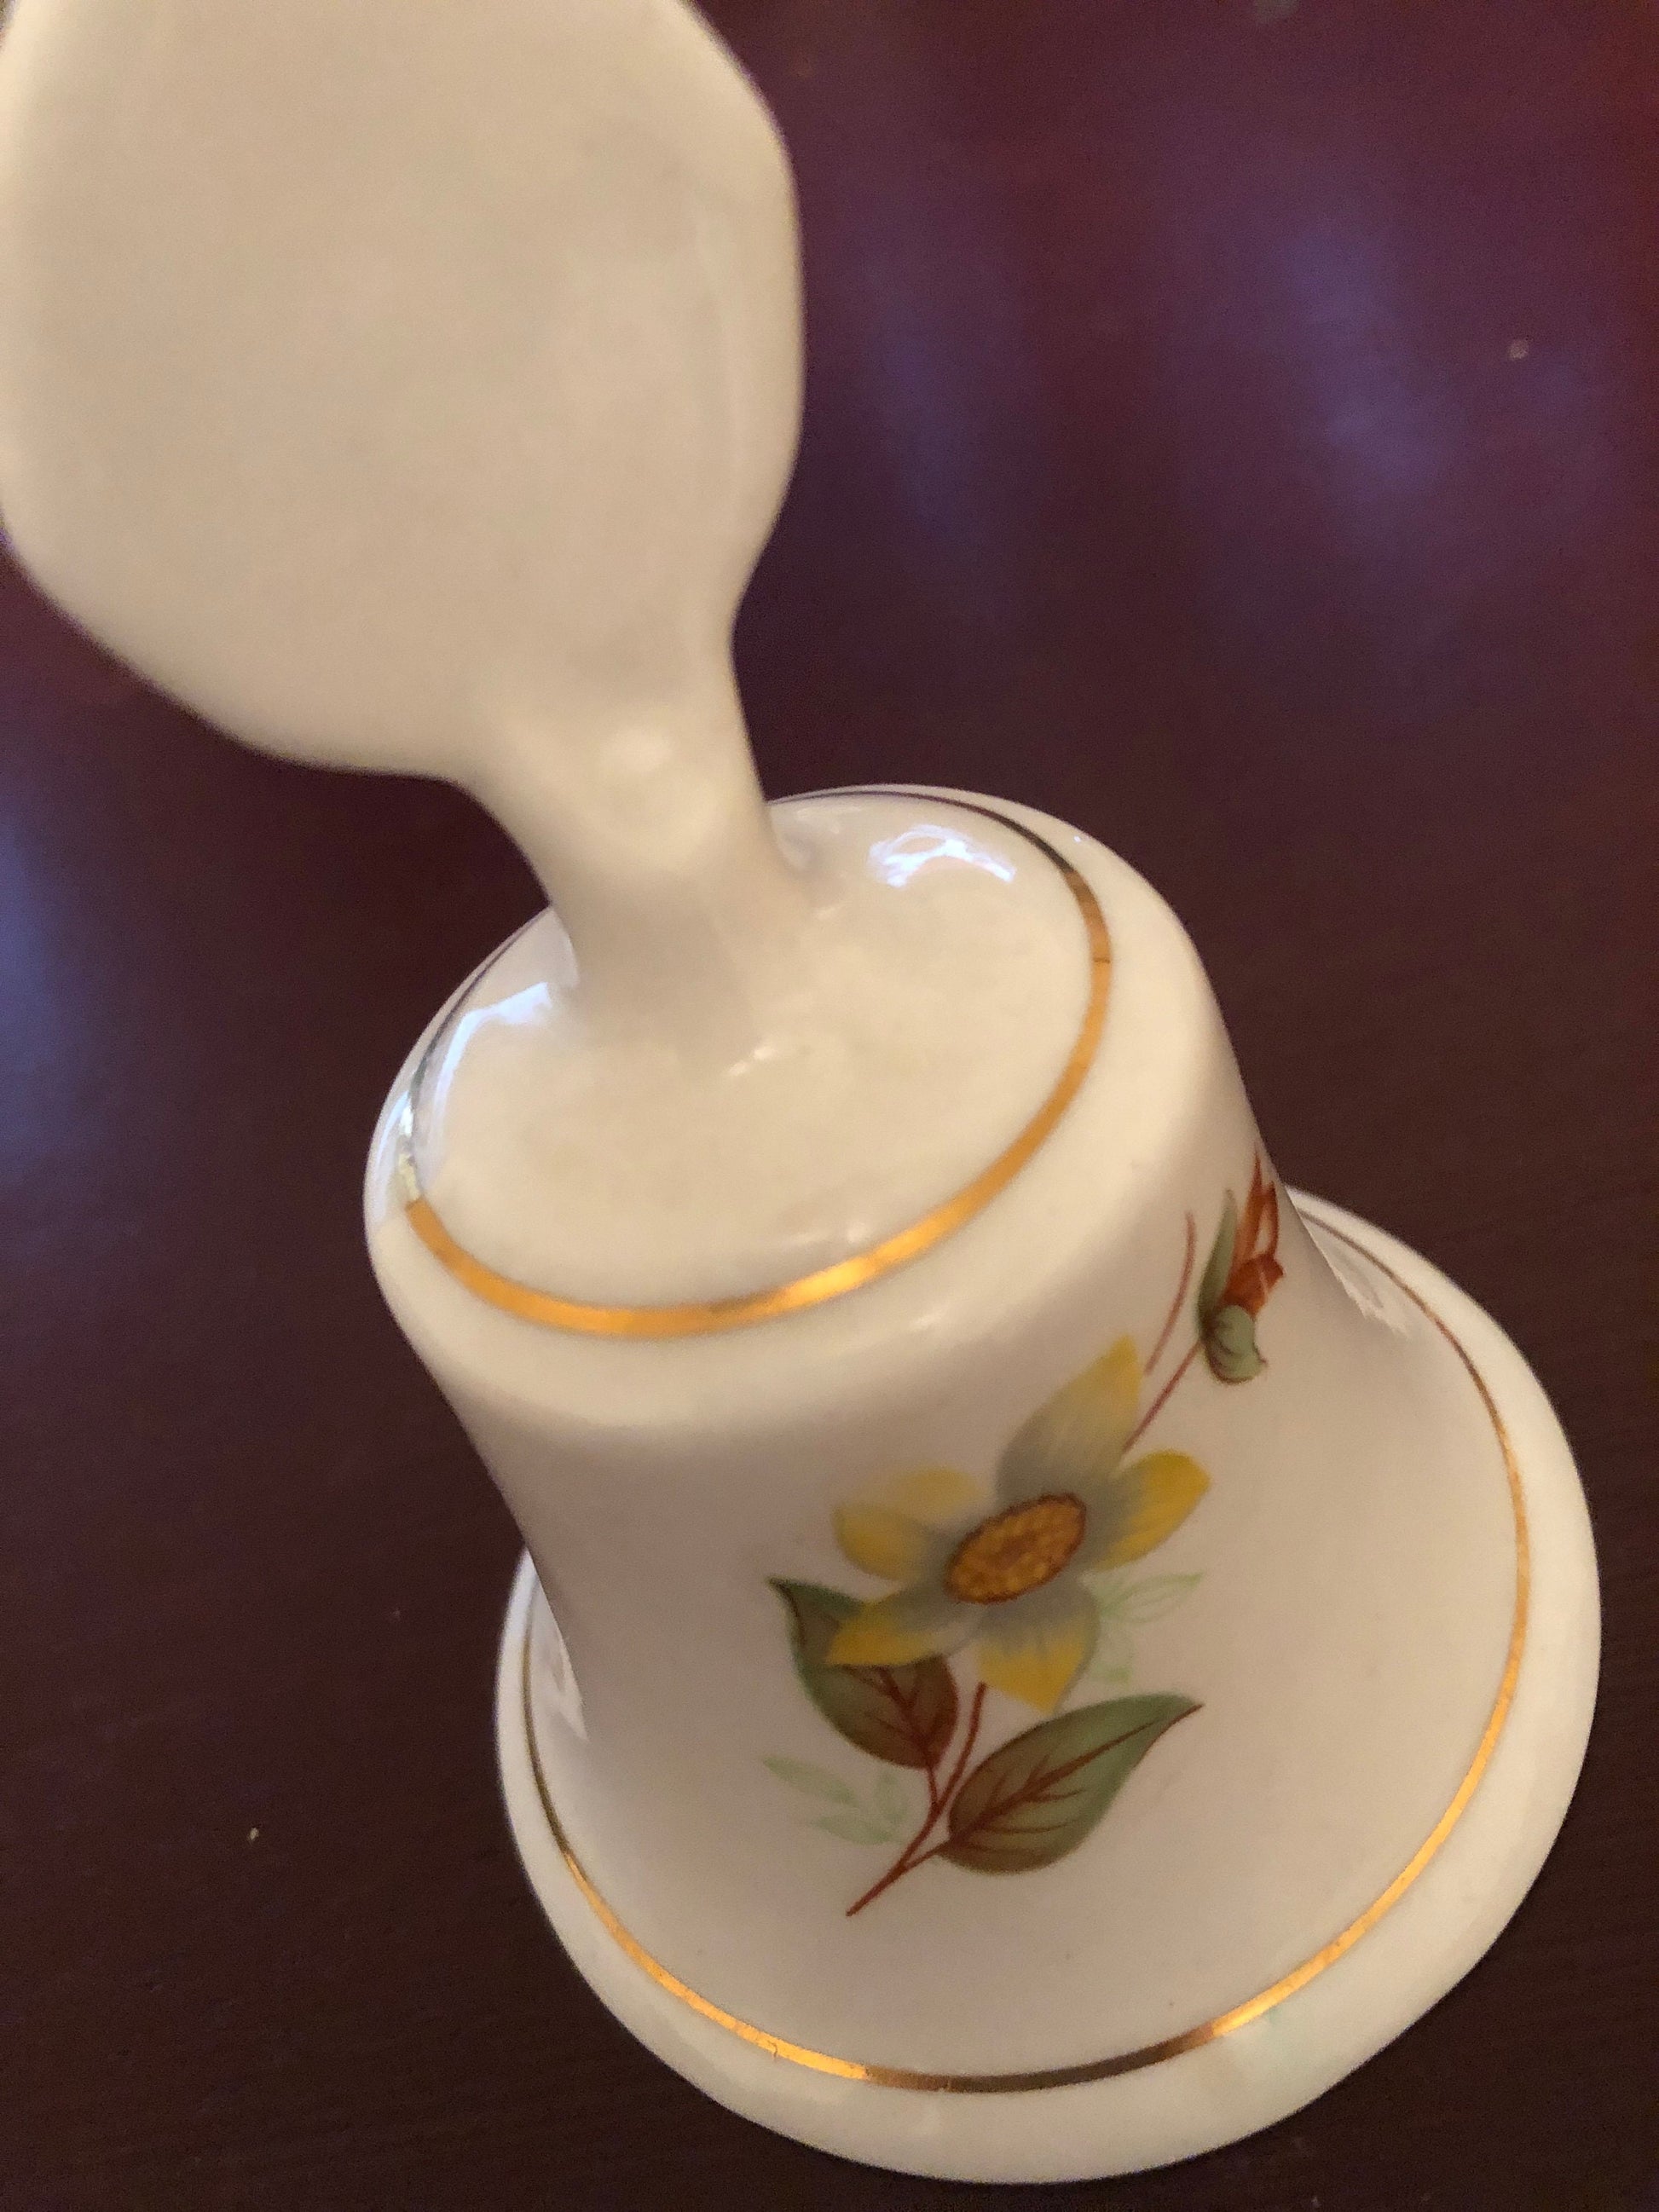 Bell by Chelson Fine Bone China, made in England, Vintage Collectible